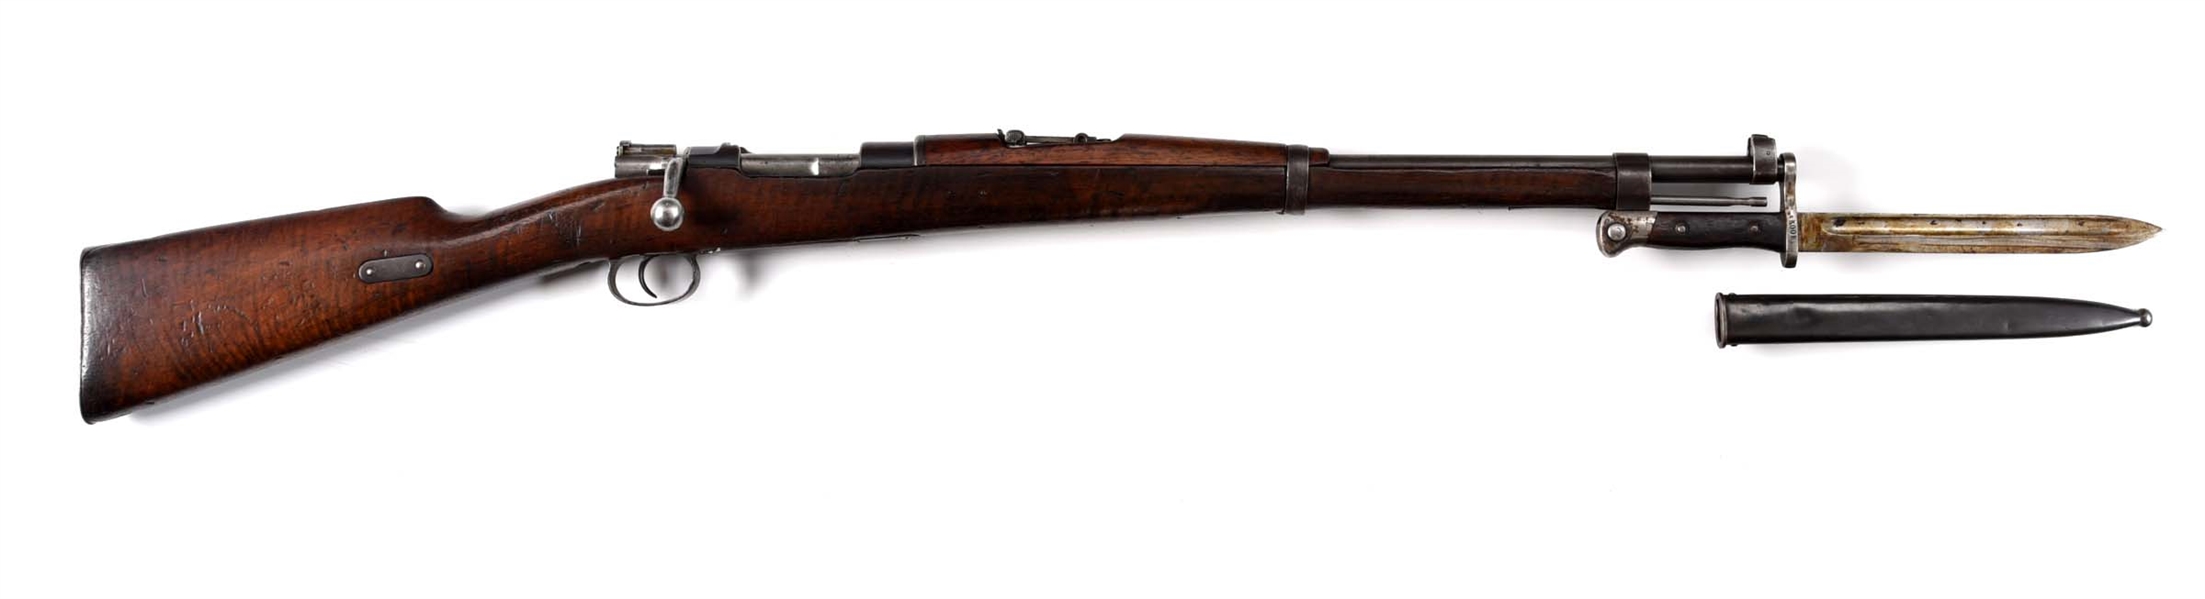 (A) LUDWIG LOEWE CHILENO MODEL 1895 BOLT ACTION CARBINE WITH BAYONET.